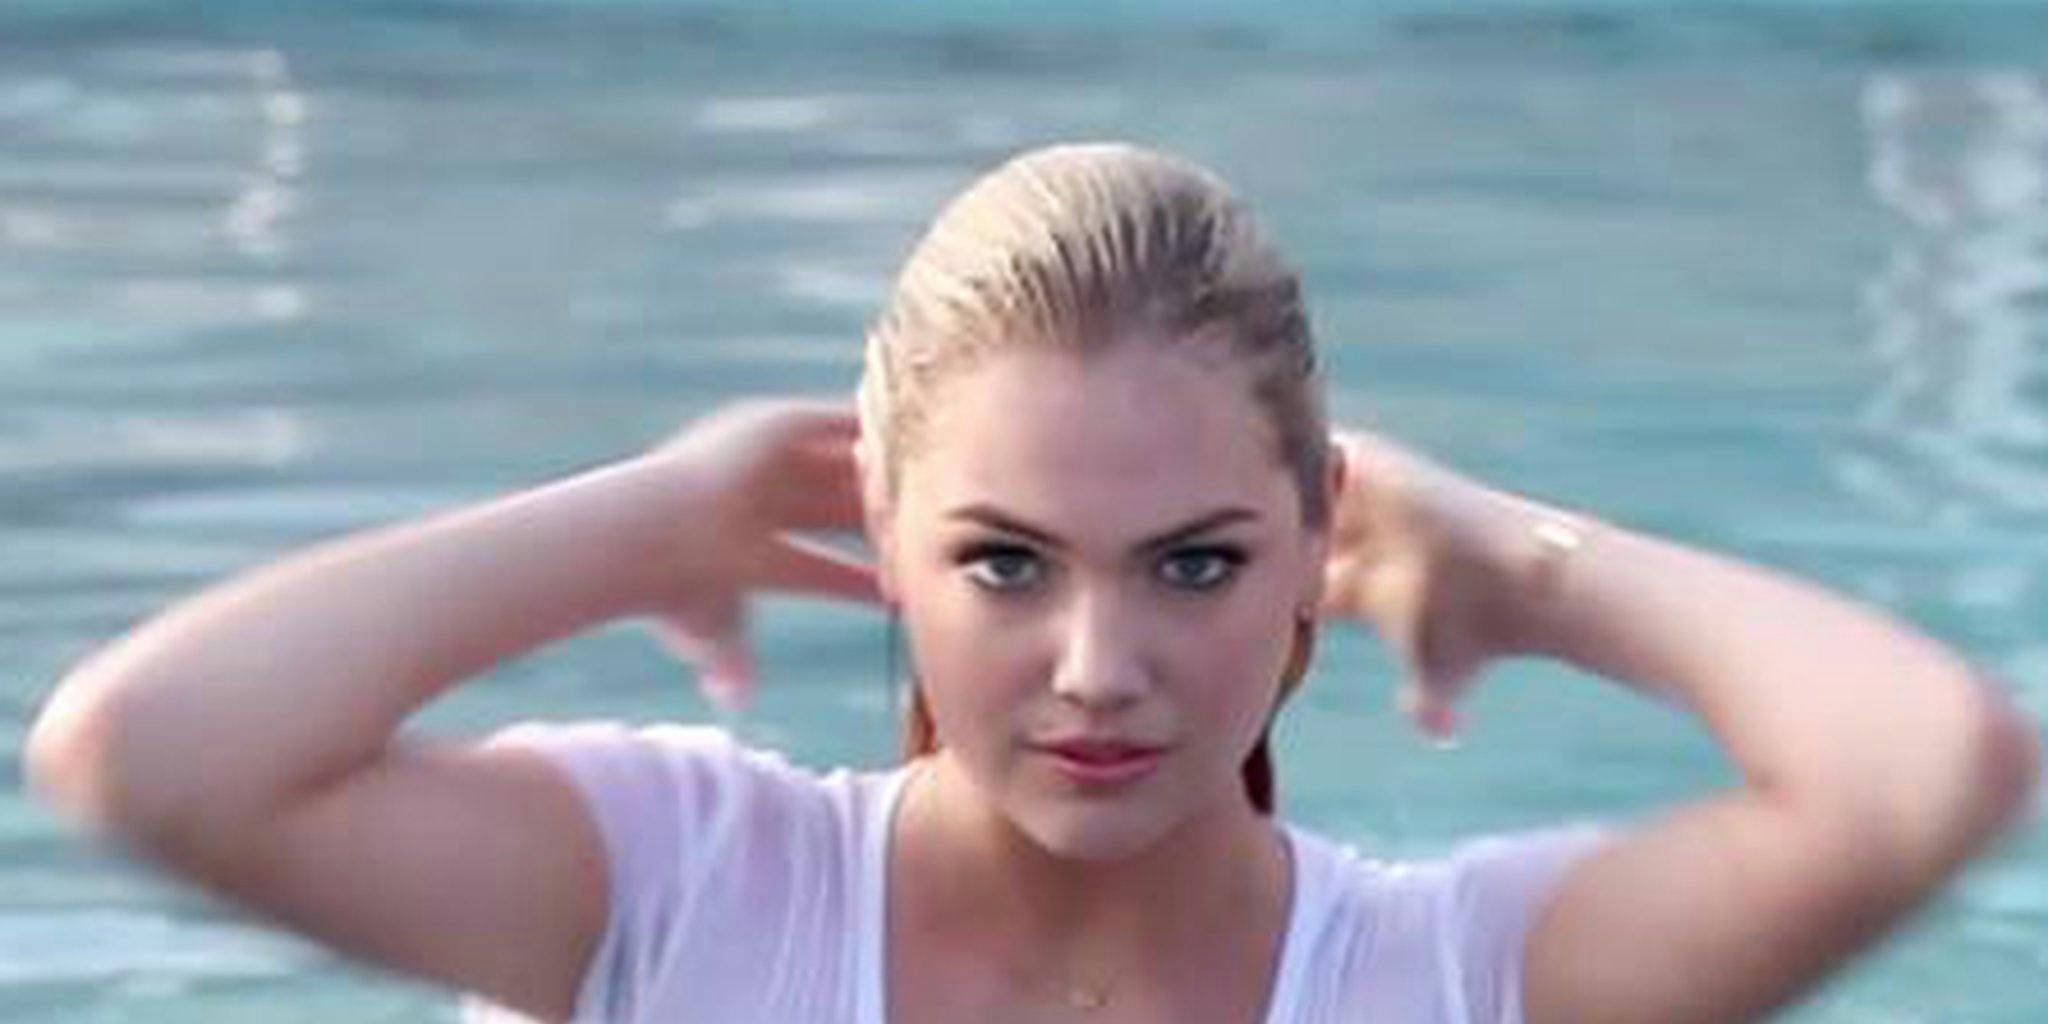 bryan wild recommends Kate Upton Wet Tshirt